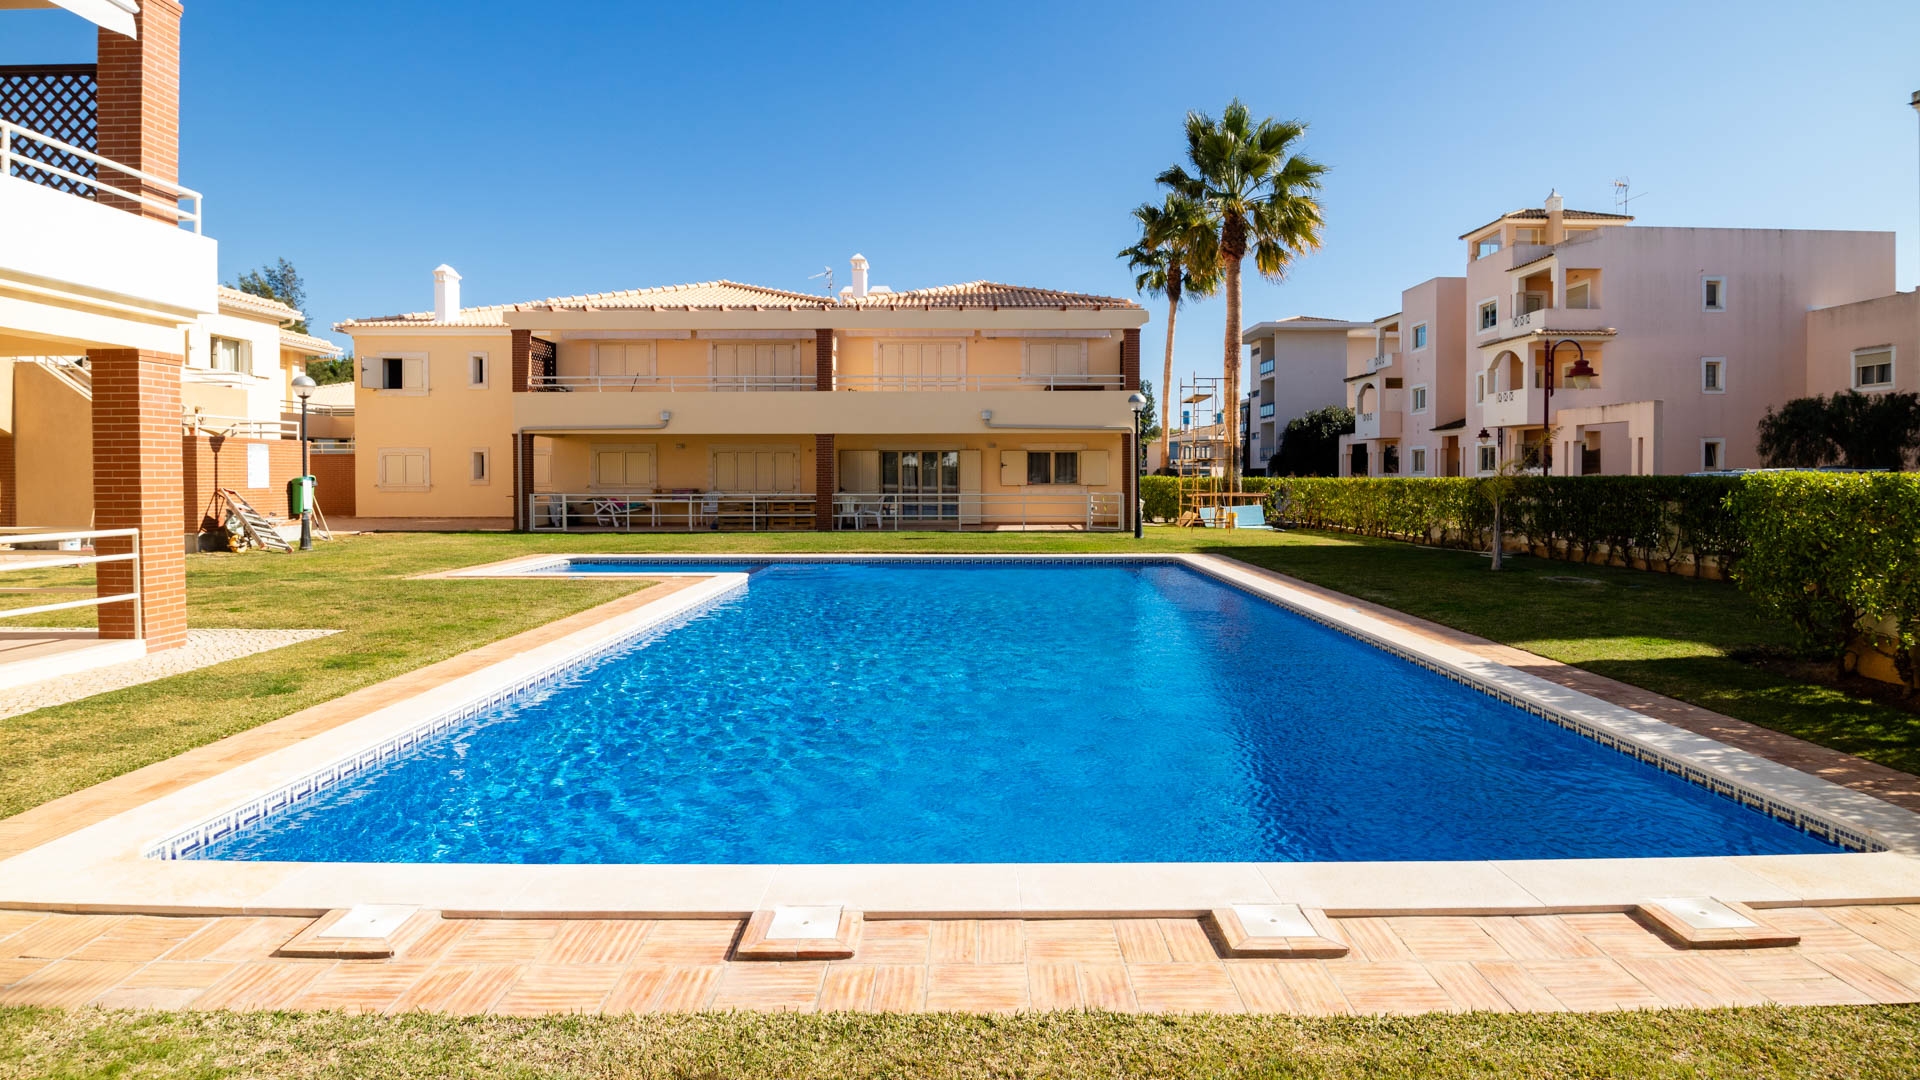 Newly Renovated 2 Bedroom Apartment with Open Plan Living and Golf Views, Vilamoura | VM1896 Open plan living in newly renovated property with golf views make this apartment perfect for an investment.